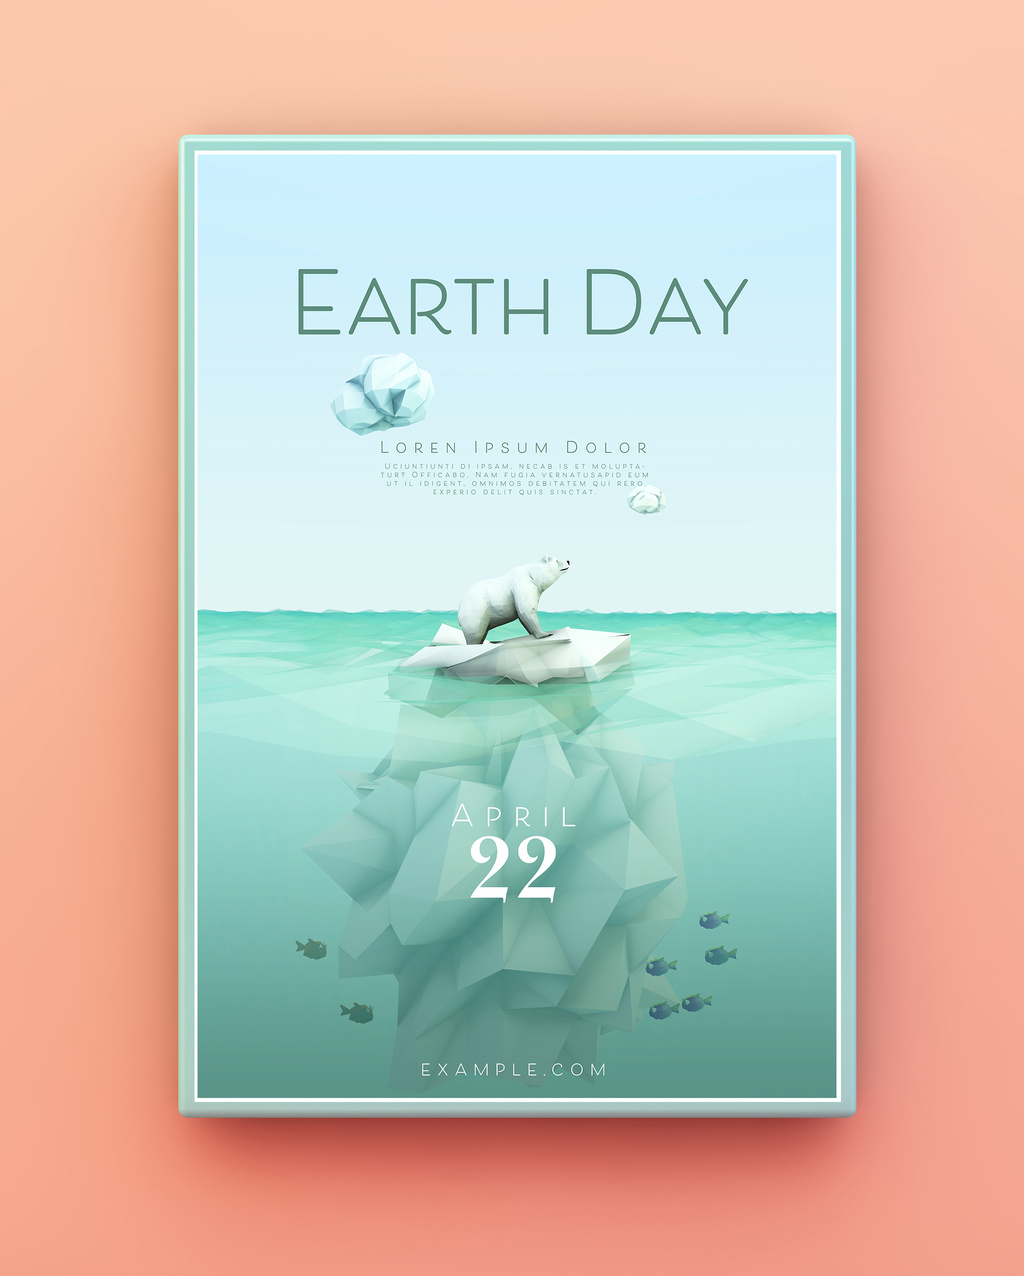 Earth Day Poster Layout with Polar Bear and Iceberg Illustration